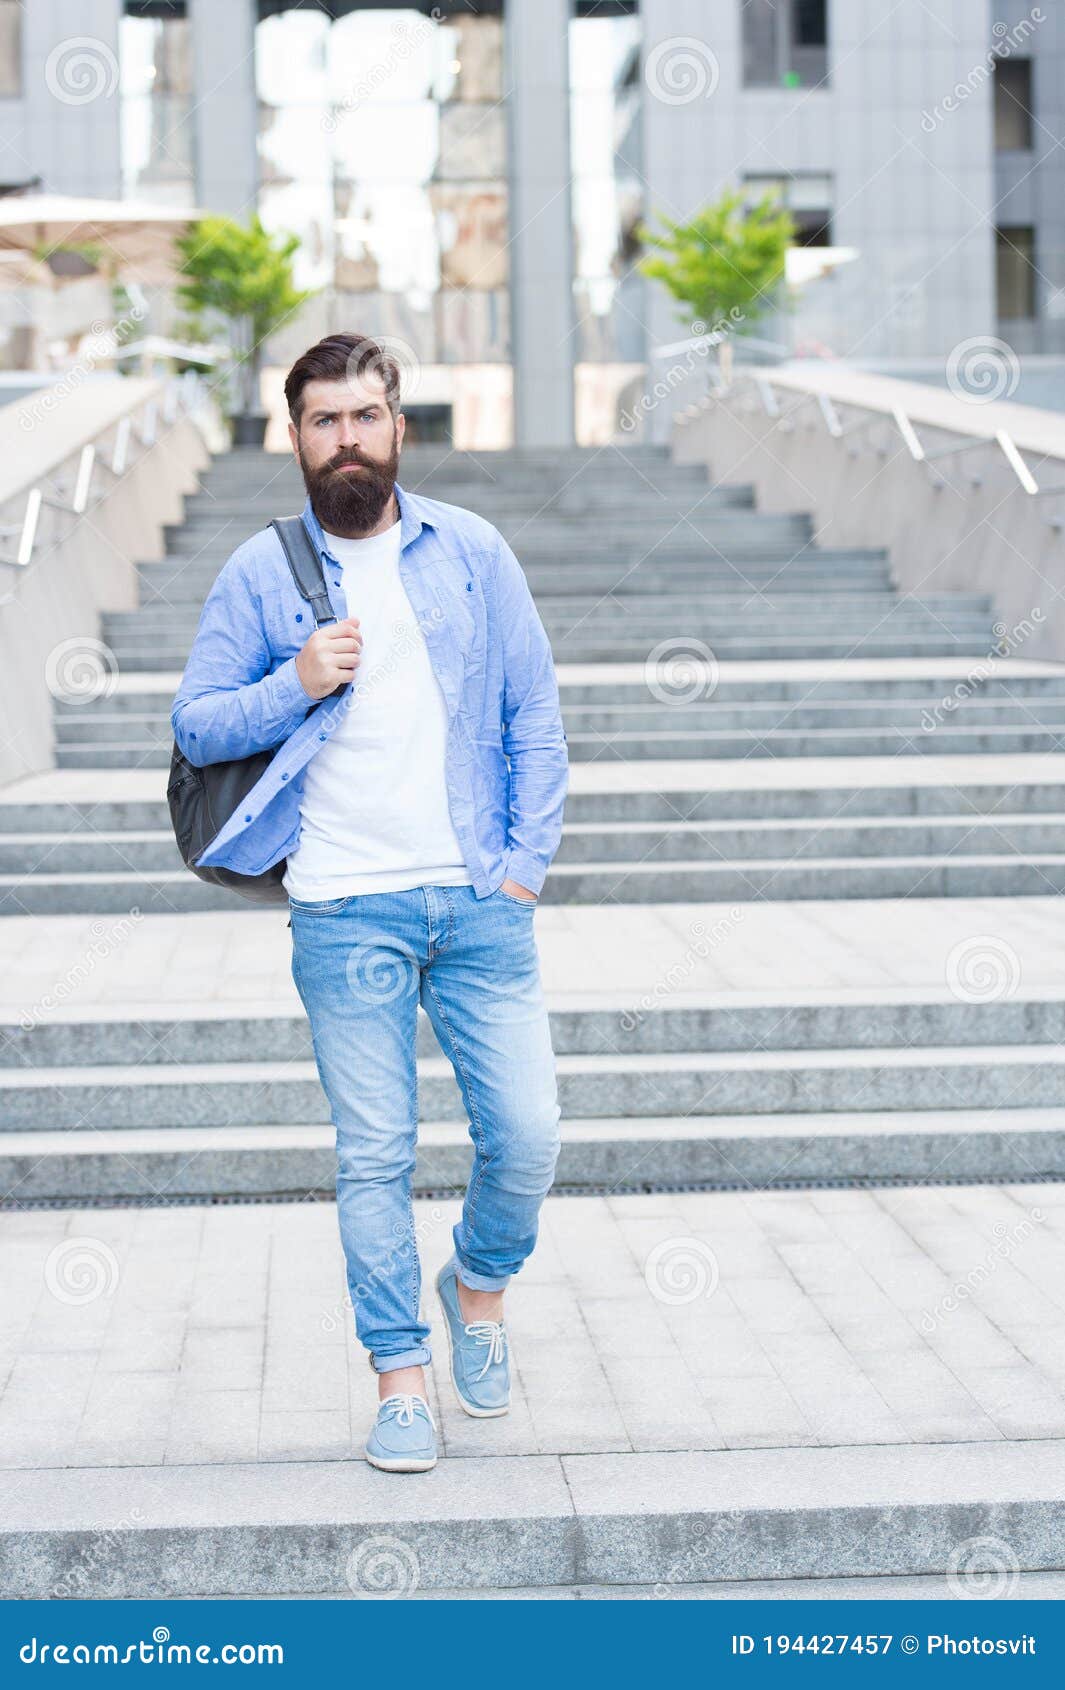 Summer is in. Bearded Man Go Downstairs Outdoors. Hipster Wear Fashion  Summer Style. Casual Summer Outfit Stock Image - Image of caucasian, beard:  194427457